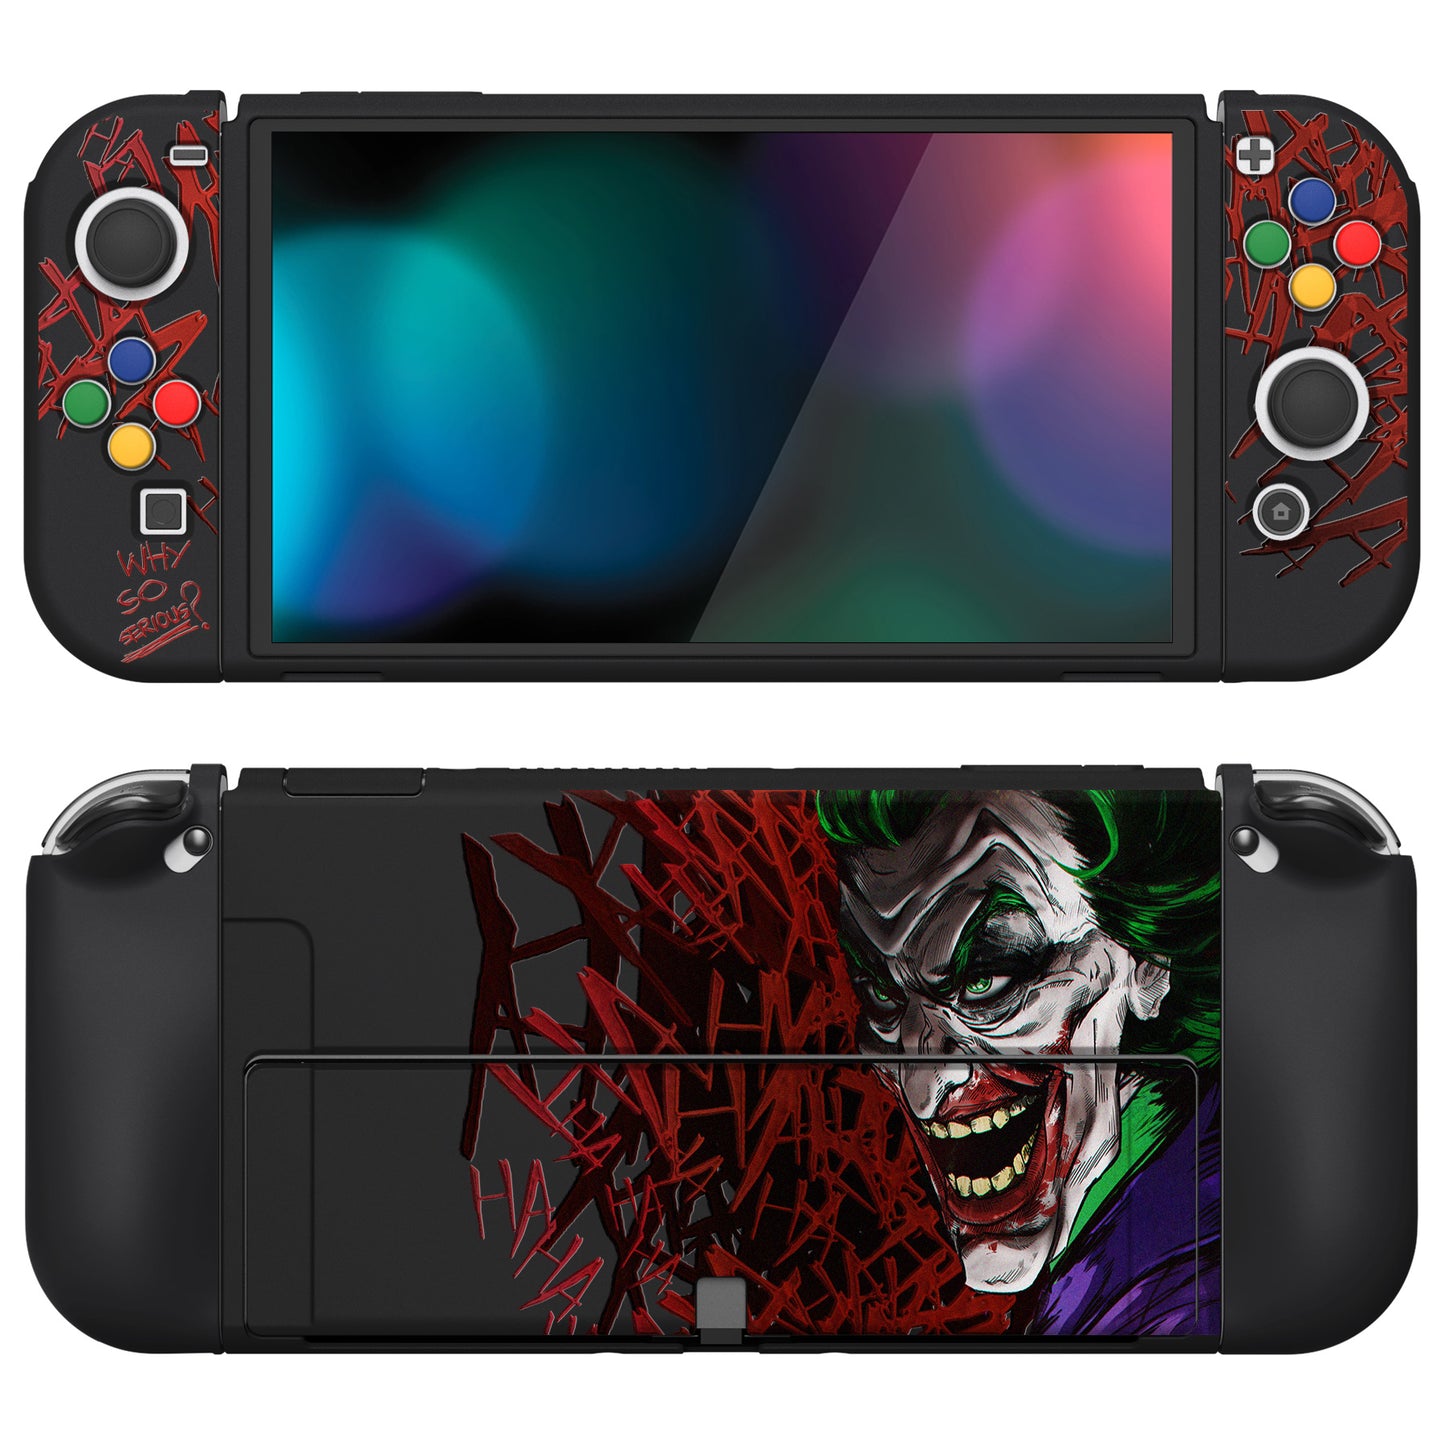 PlayVital ZealProtect Soft Protective Case for Switch OLED, Flexible Protector Joycon Grip Cover for Switch OLED with Thumb Grip Caps & ABXY Direction Button Caps - Clown Hahaha - XSOYV6029 playvital